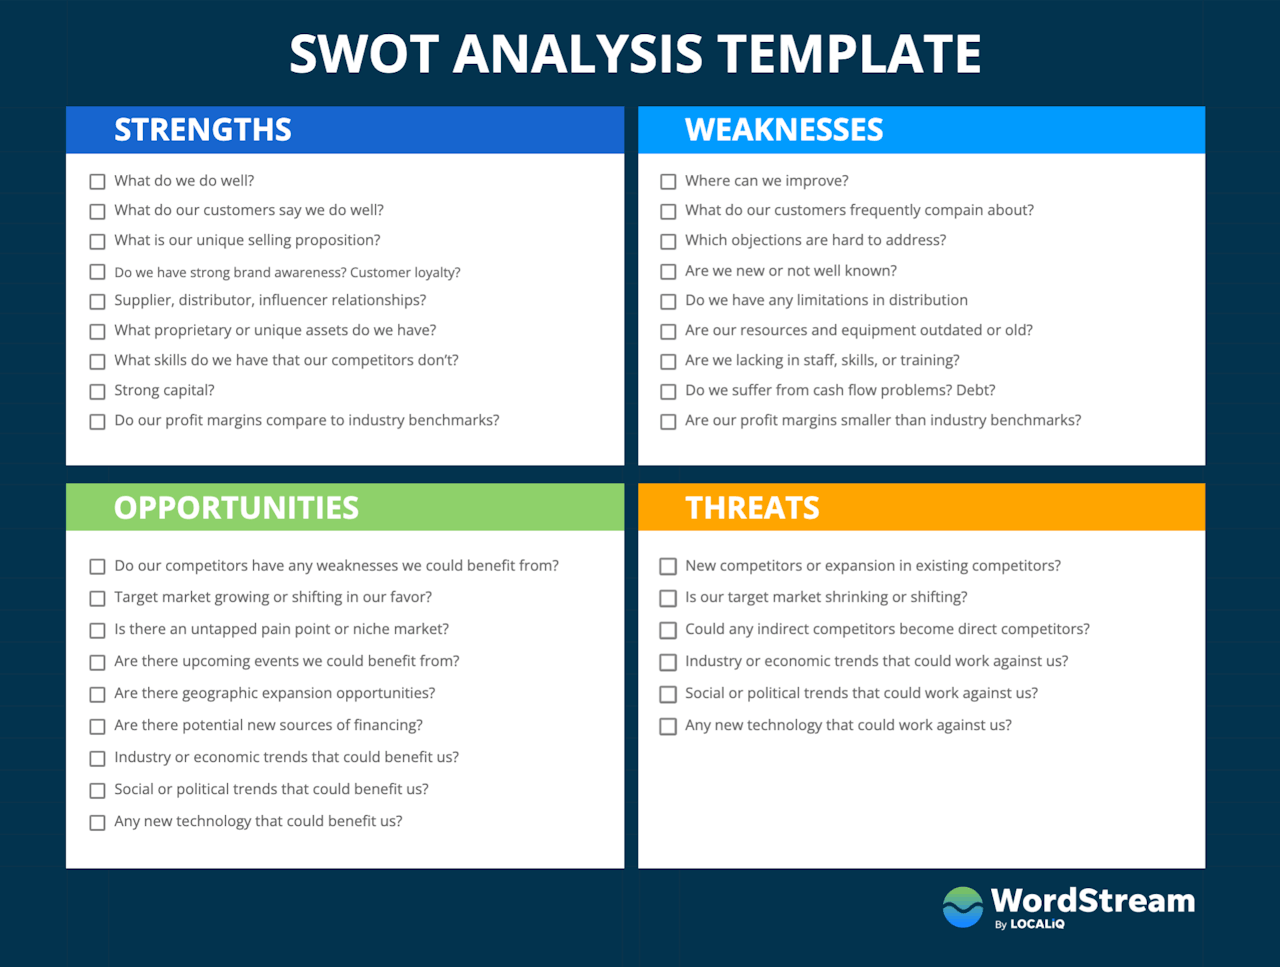 CRM strategy: SWOT analysis template